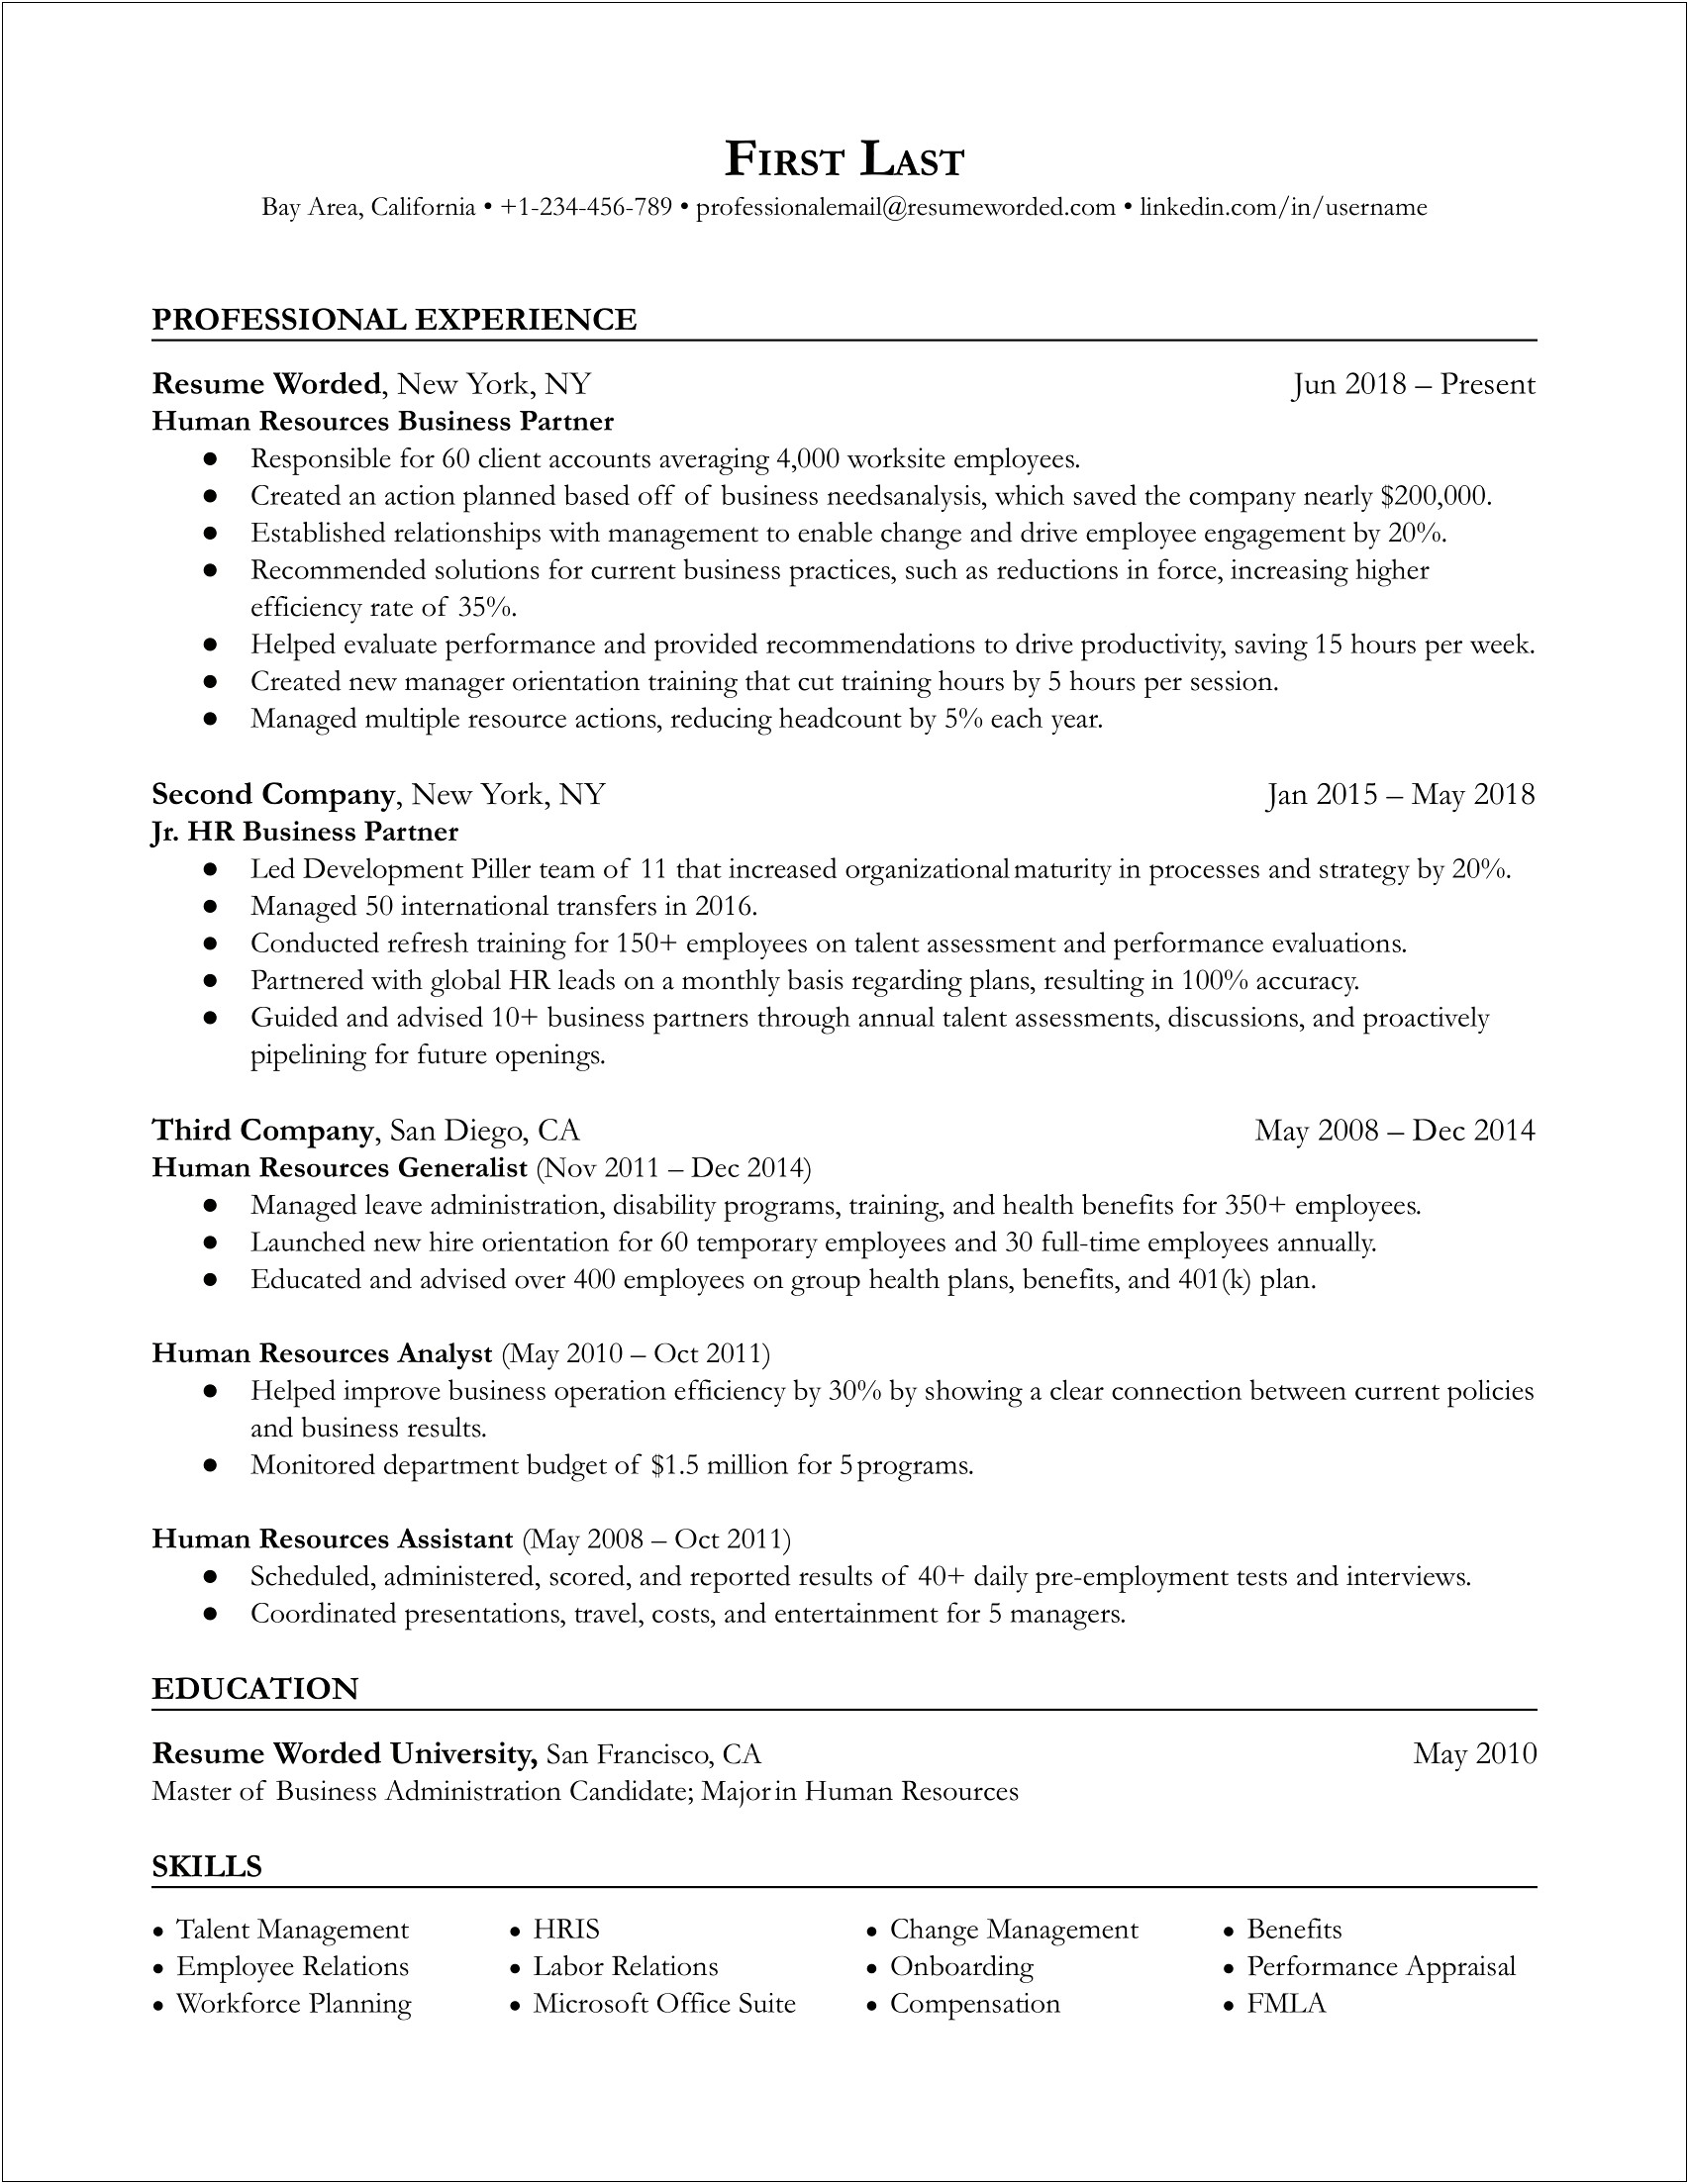 Best Resume Format Forr Workday Application